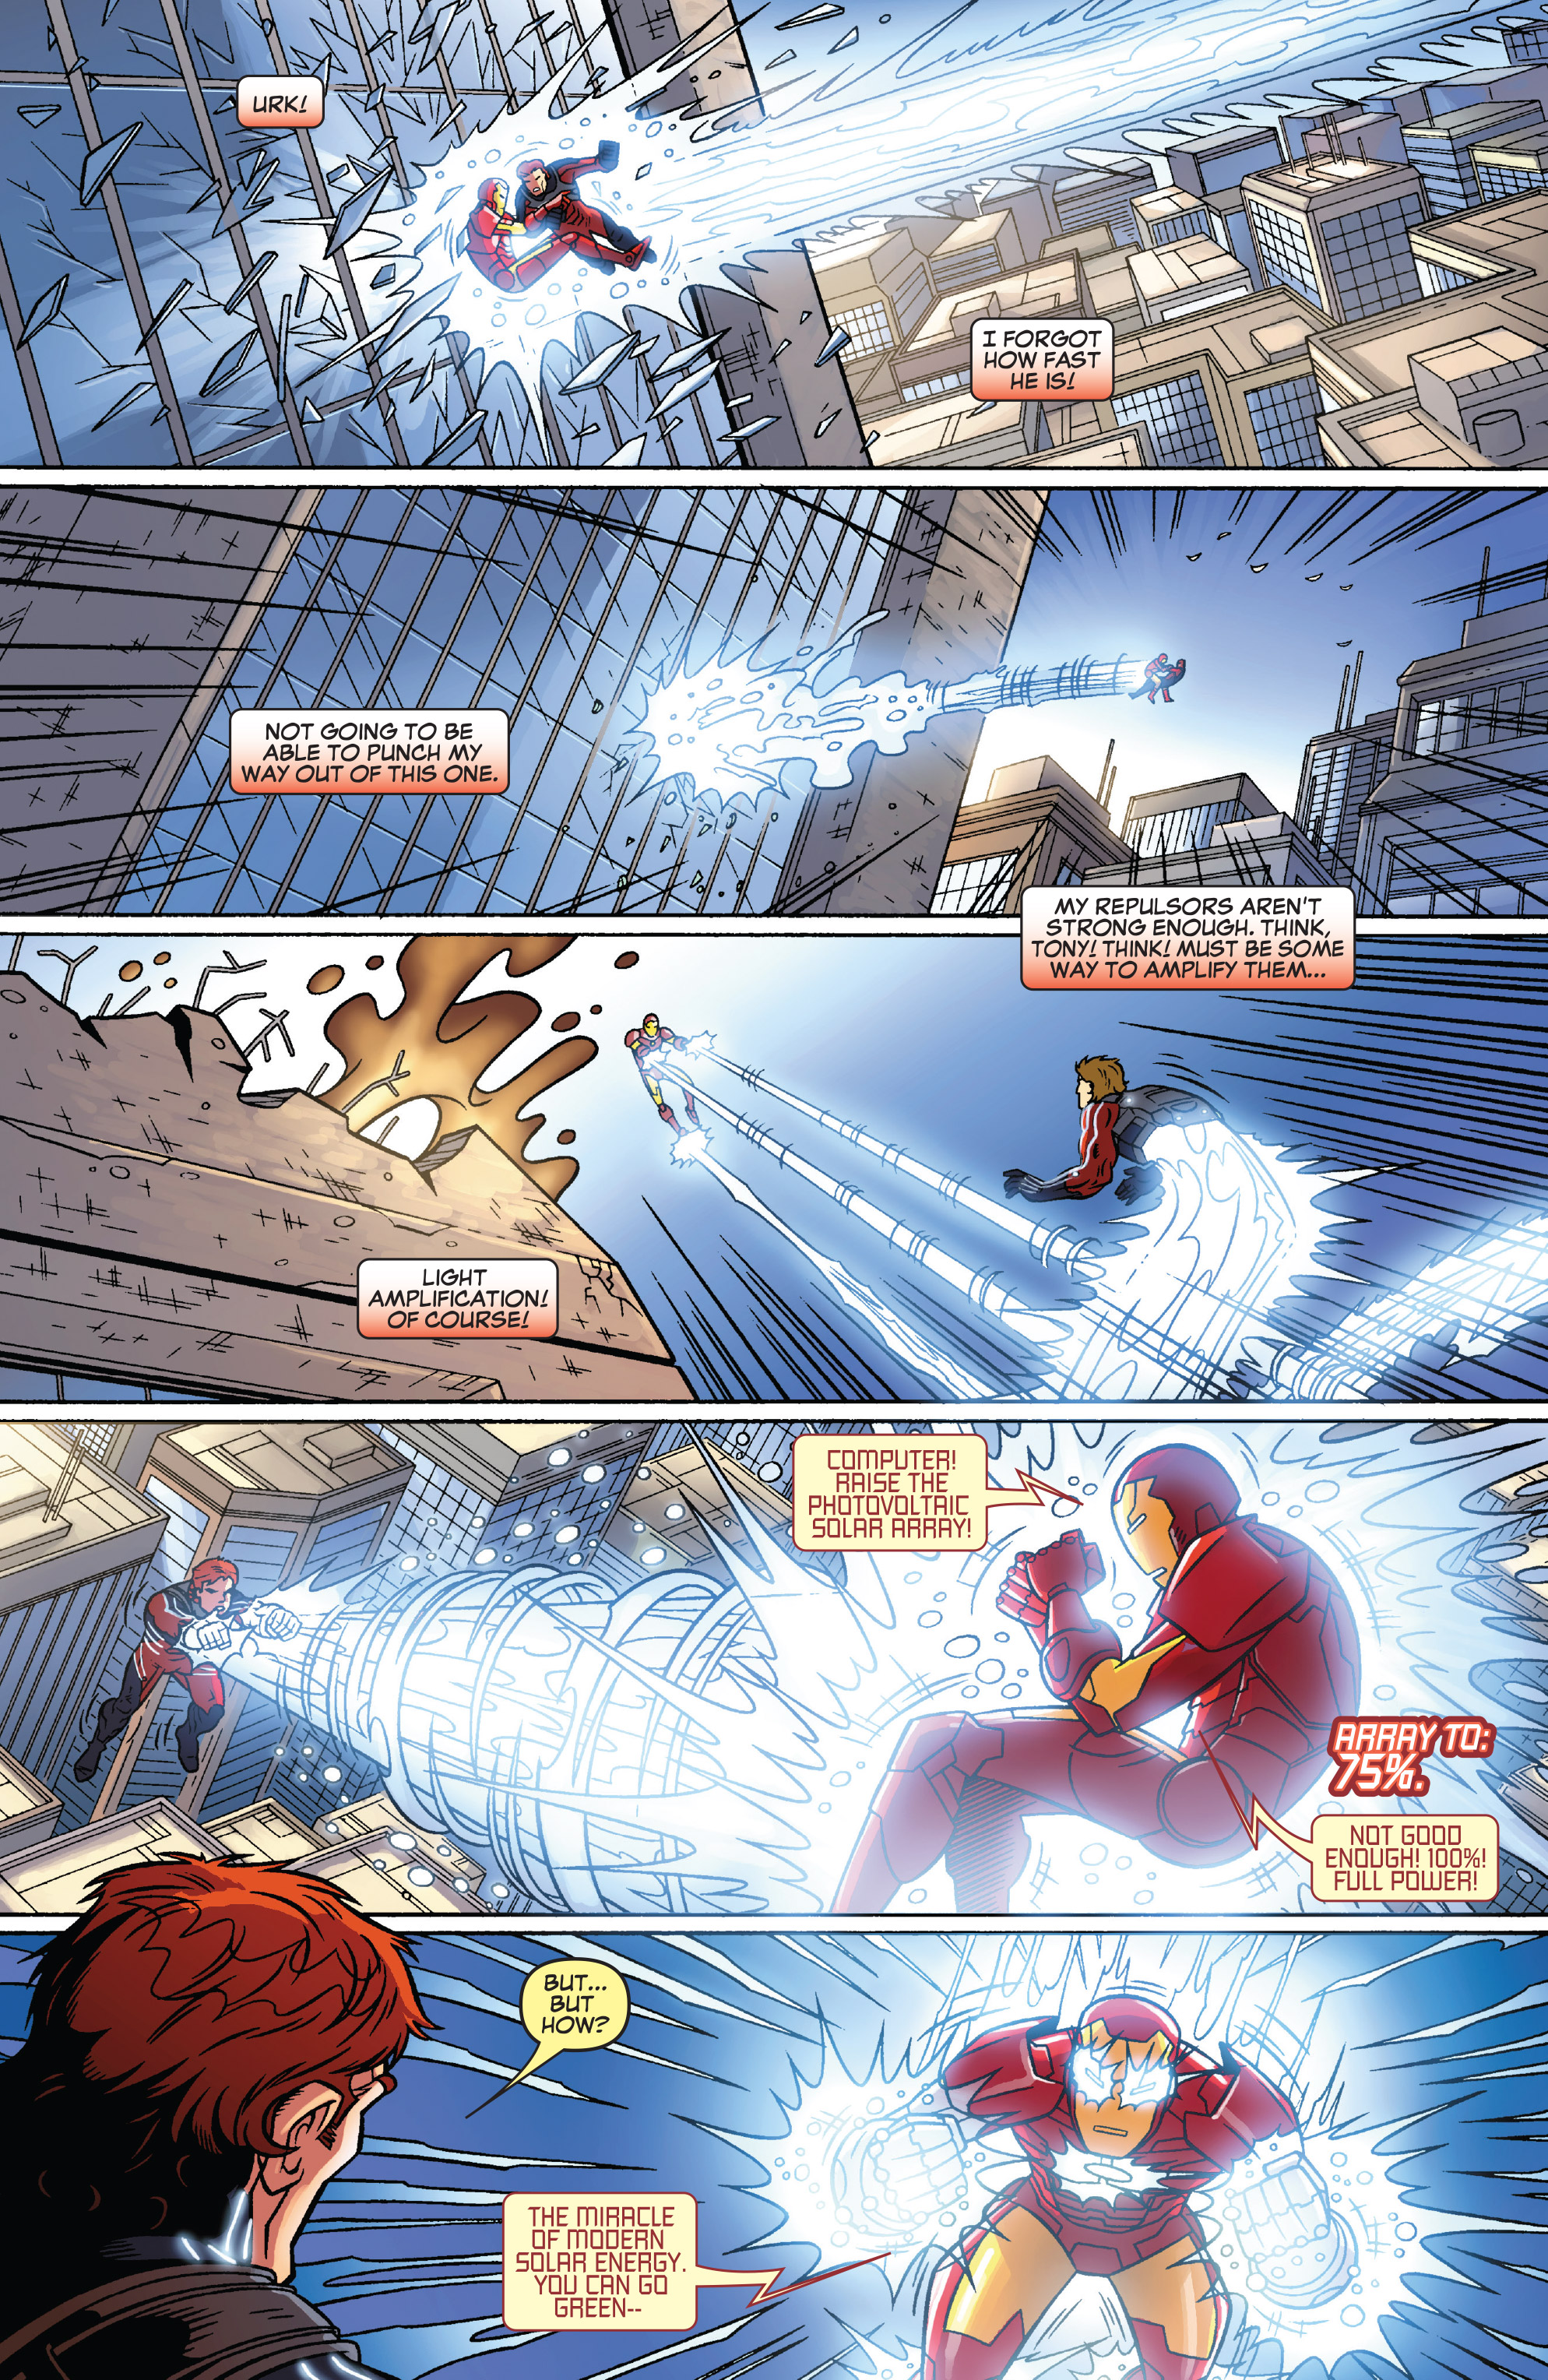 Iron Man Adventures Porn - Iron Man Armored Adventures Full | Read Iron Man Armored Adventures Full  comic online in high quality. Read Full Comic online for free - Read comics  online in high quality .|viewcomiconline.com